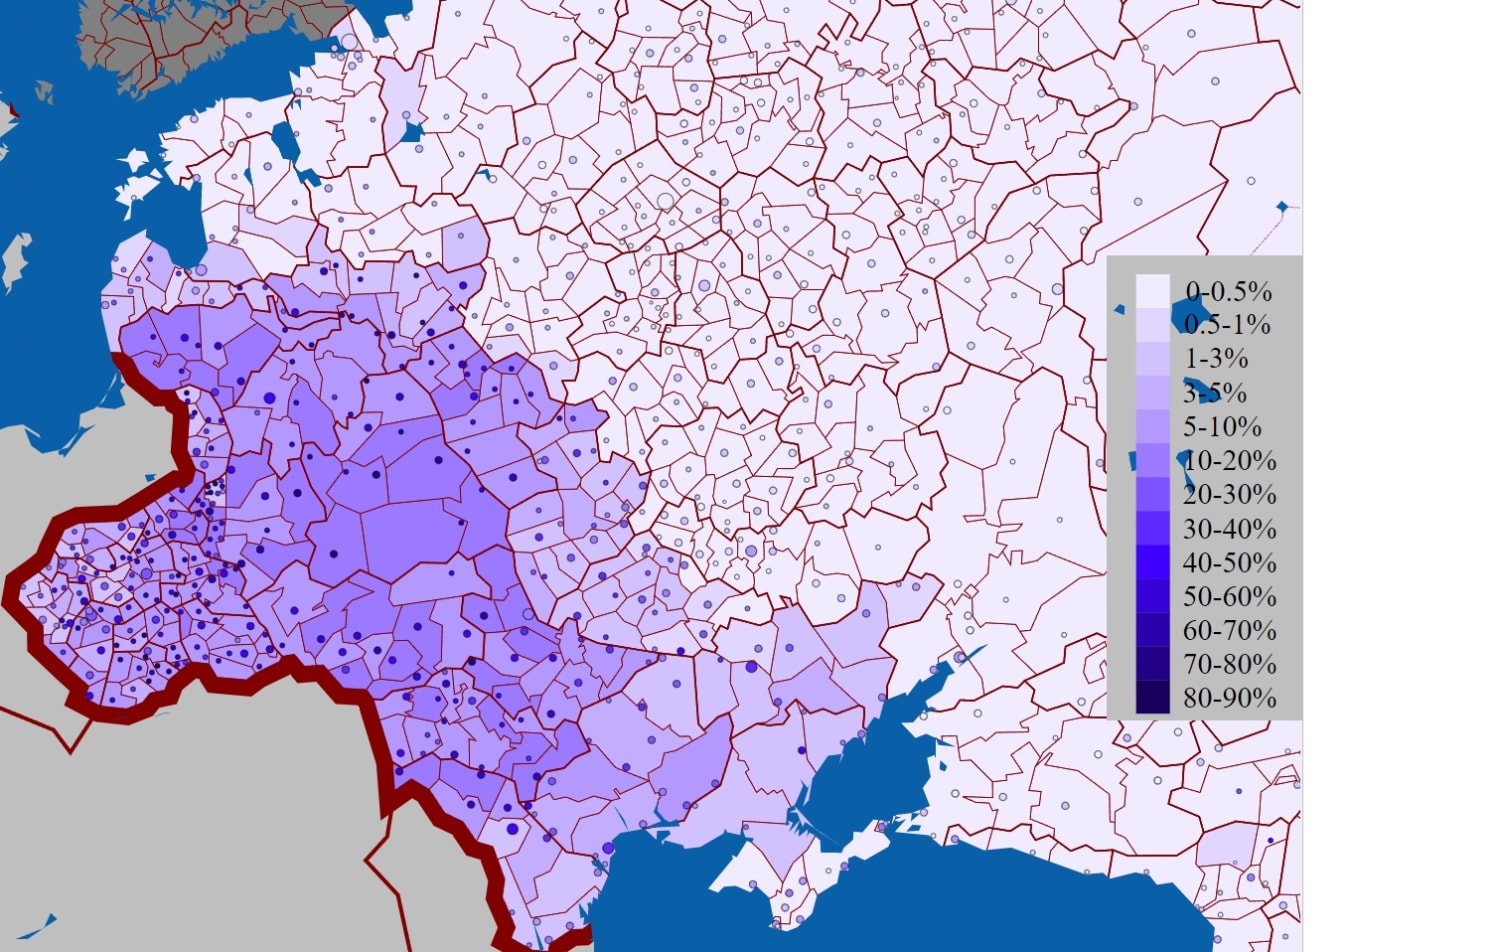 % Population of the Russian Empire that spoke Yiddish (Judeo-Germanic language) in 1897